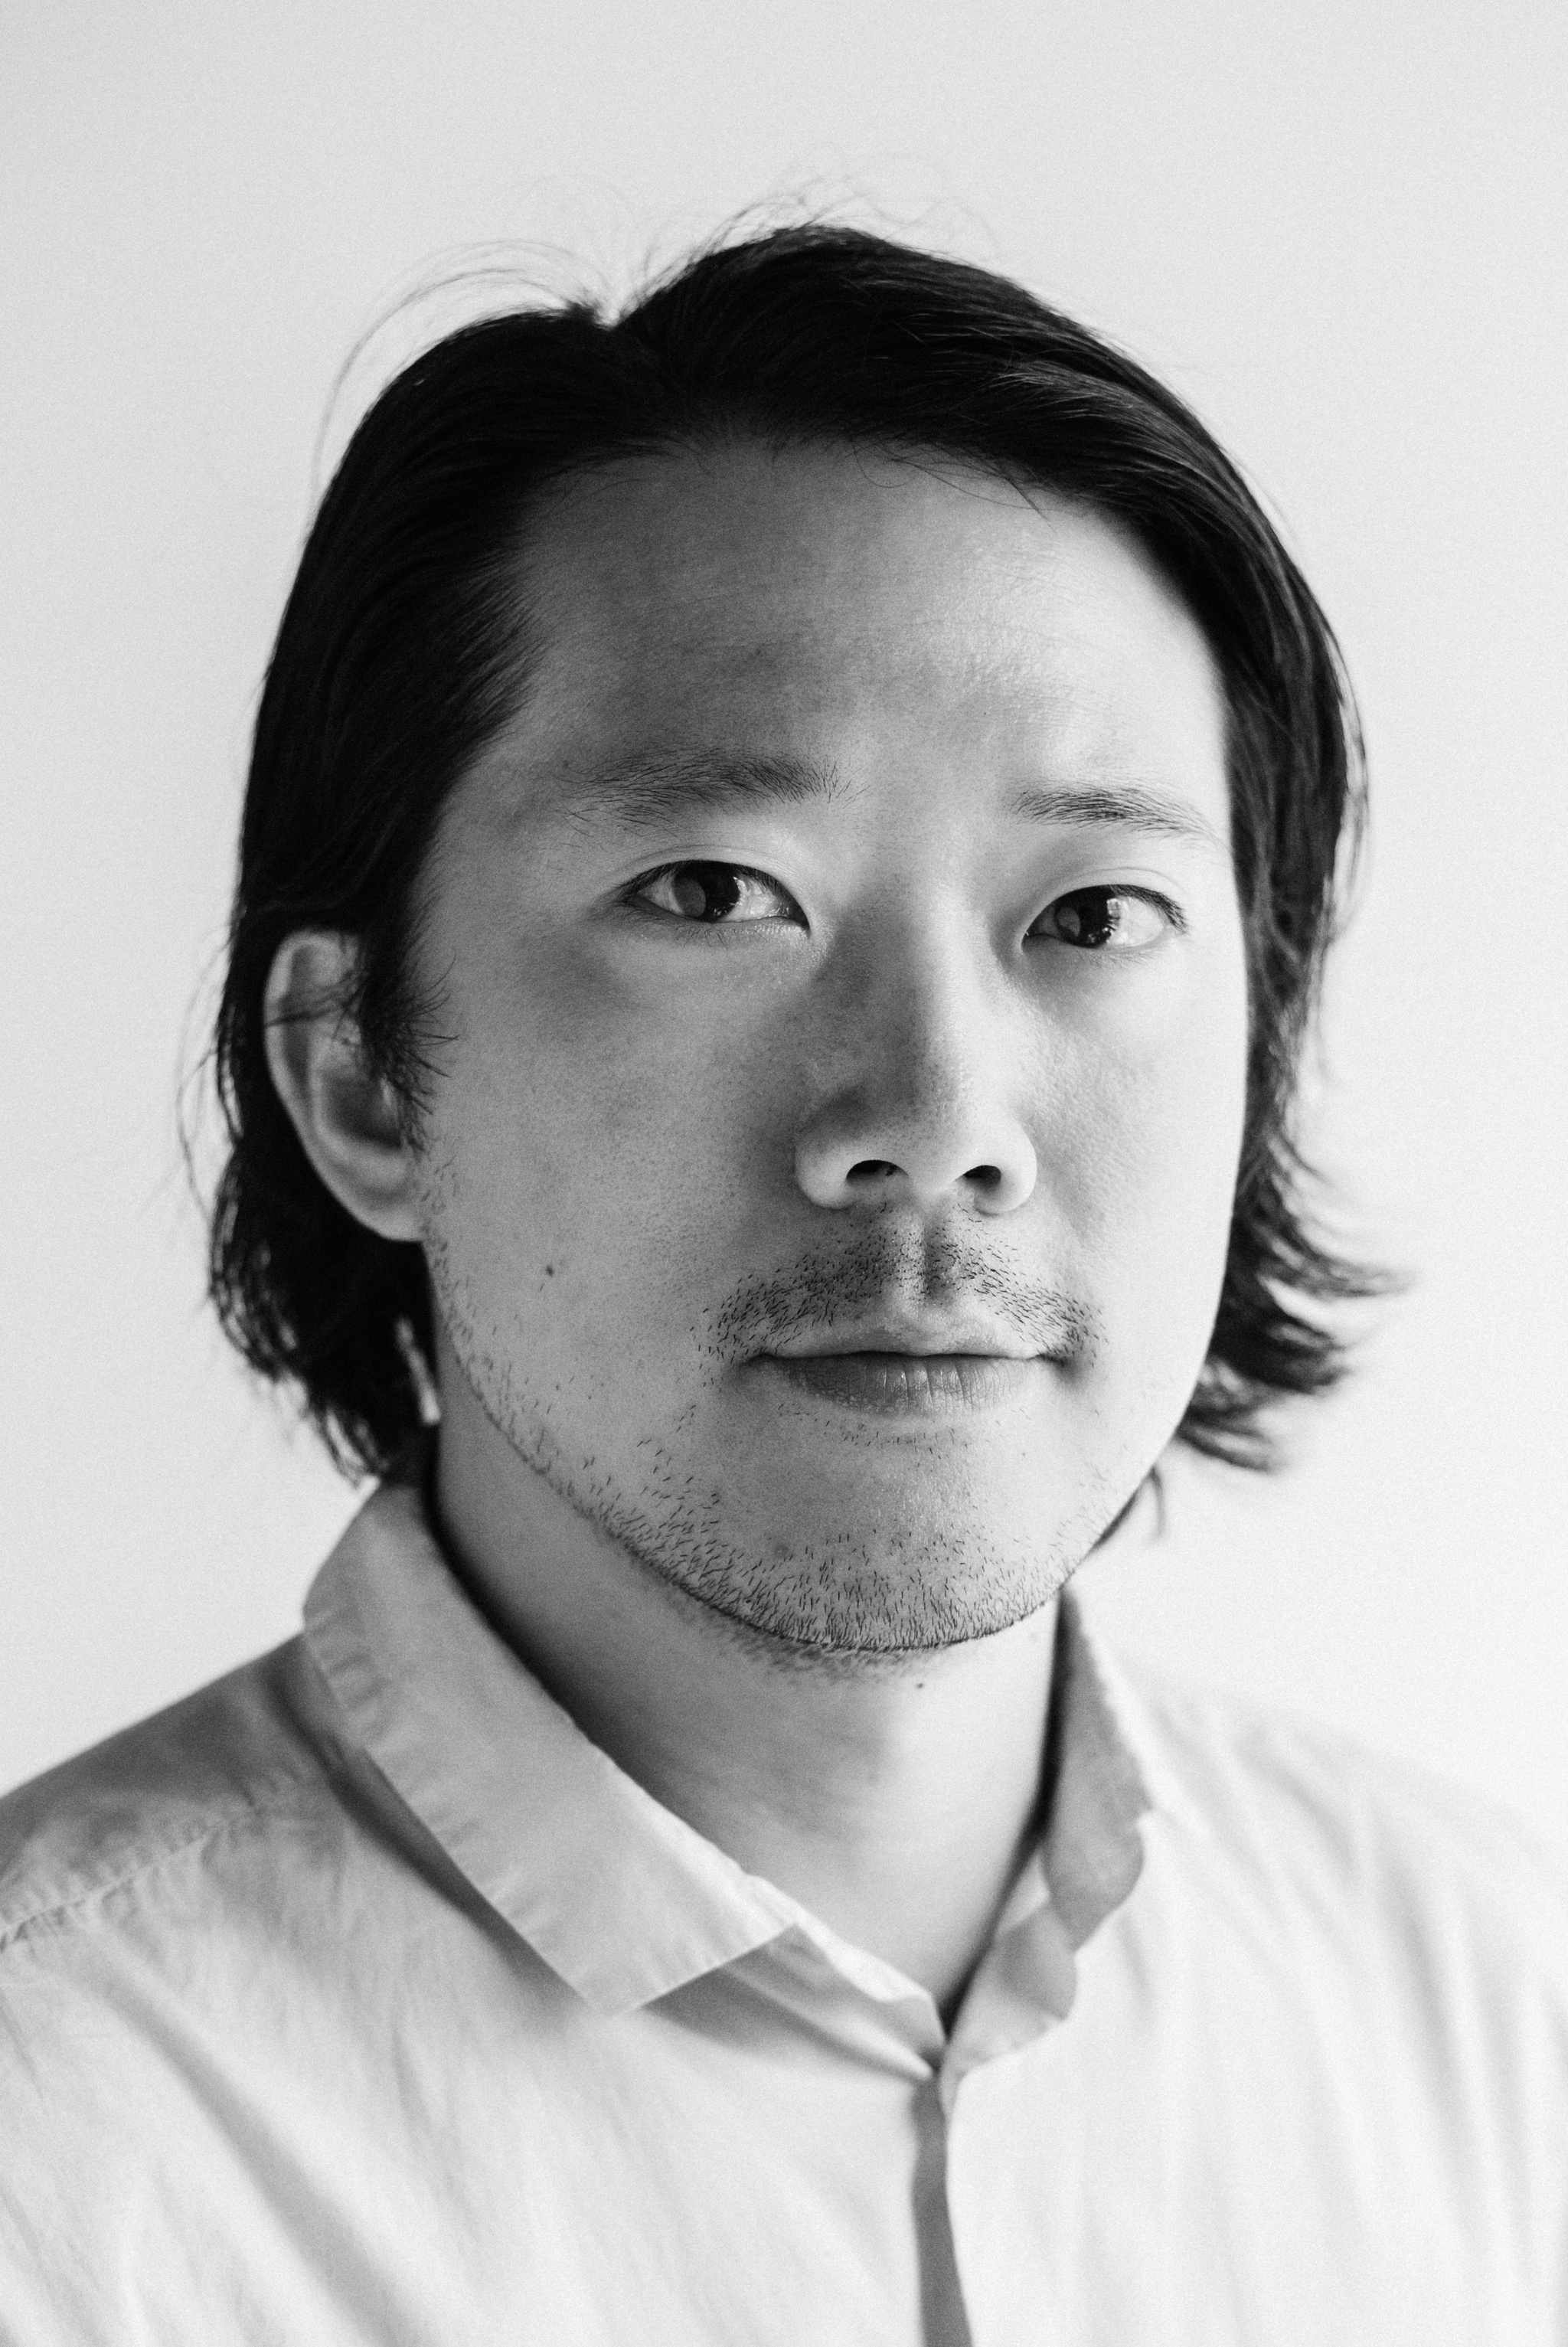 A black and white headshot of Kenneth Tam, an Asian American man who poses against a blank background. Kenneth has hair parted down the side of his head that he tucks behind his right ear. He looks pensively at us. 